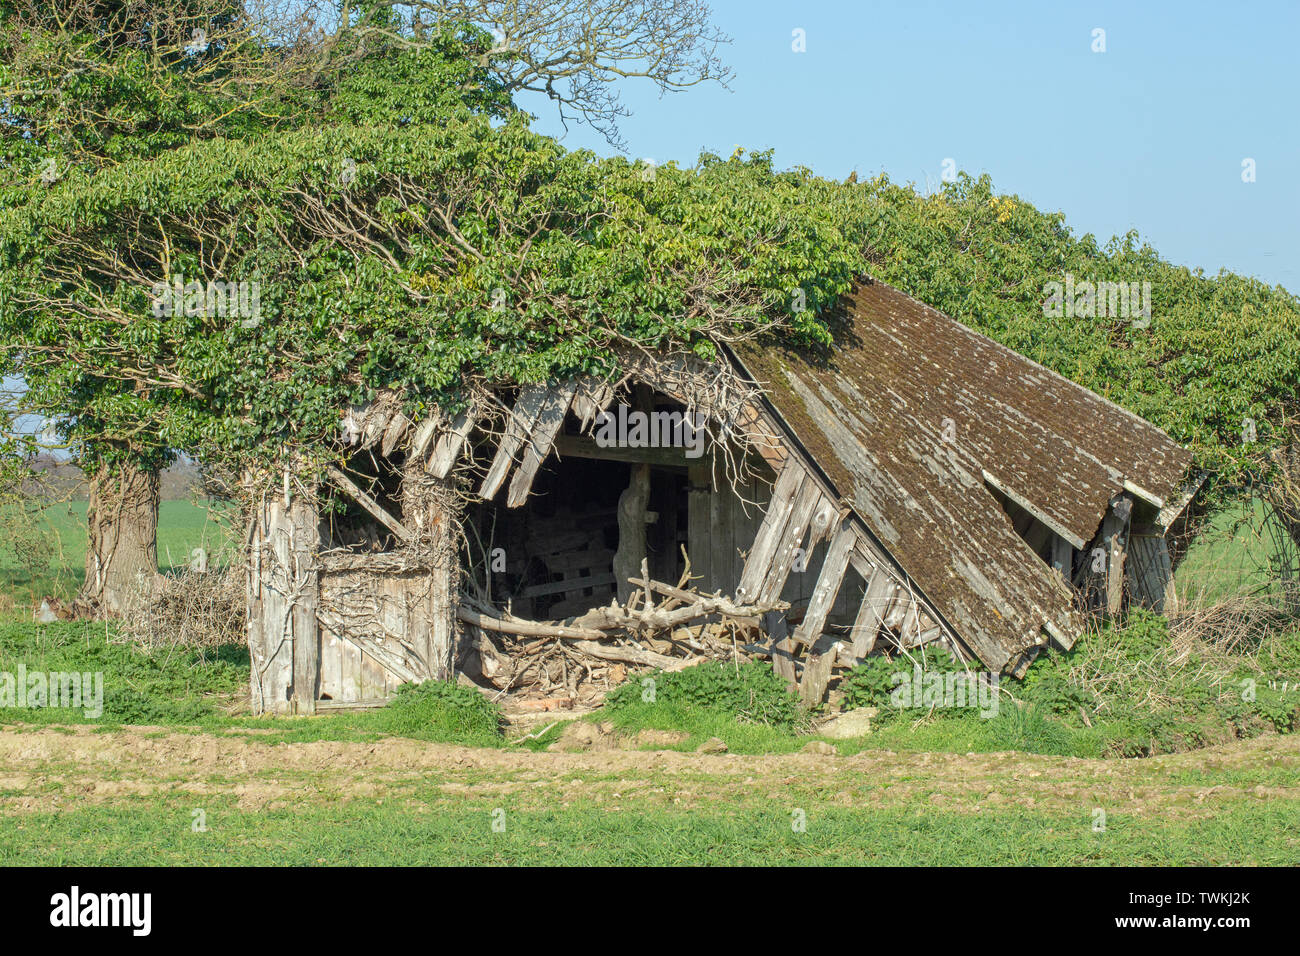 Asbestos roofed, former cattle field shed and shelter. Timber support structure collapsing. Wild Red Deer (Cervus elaphus), pruned Ivy (Hedera helix), trunks maintaining left side wall. Stock Photo